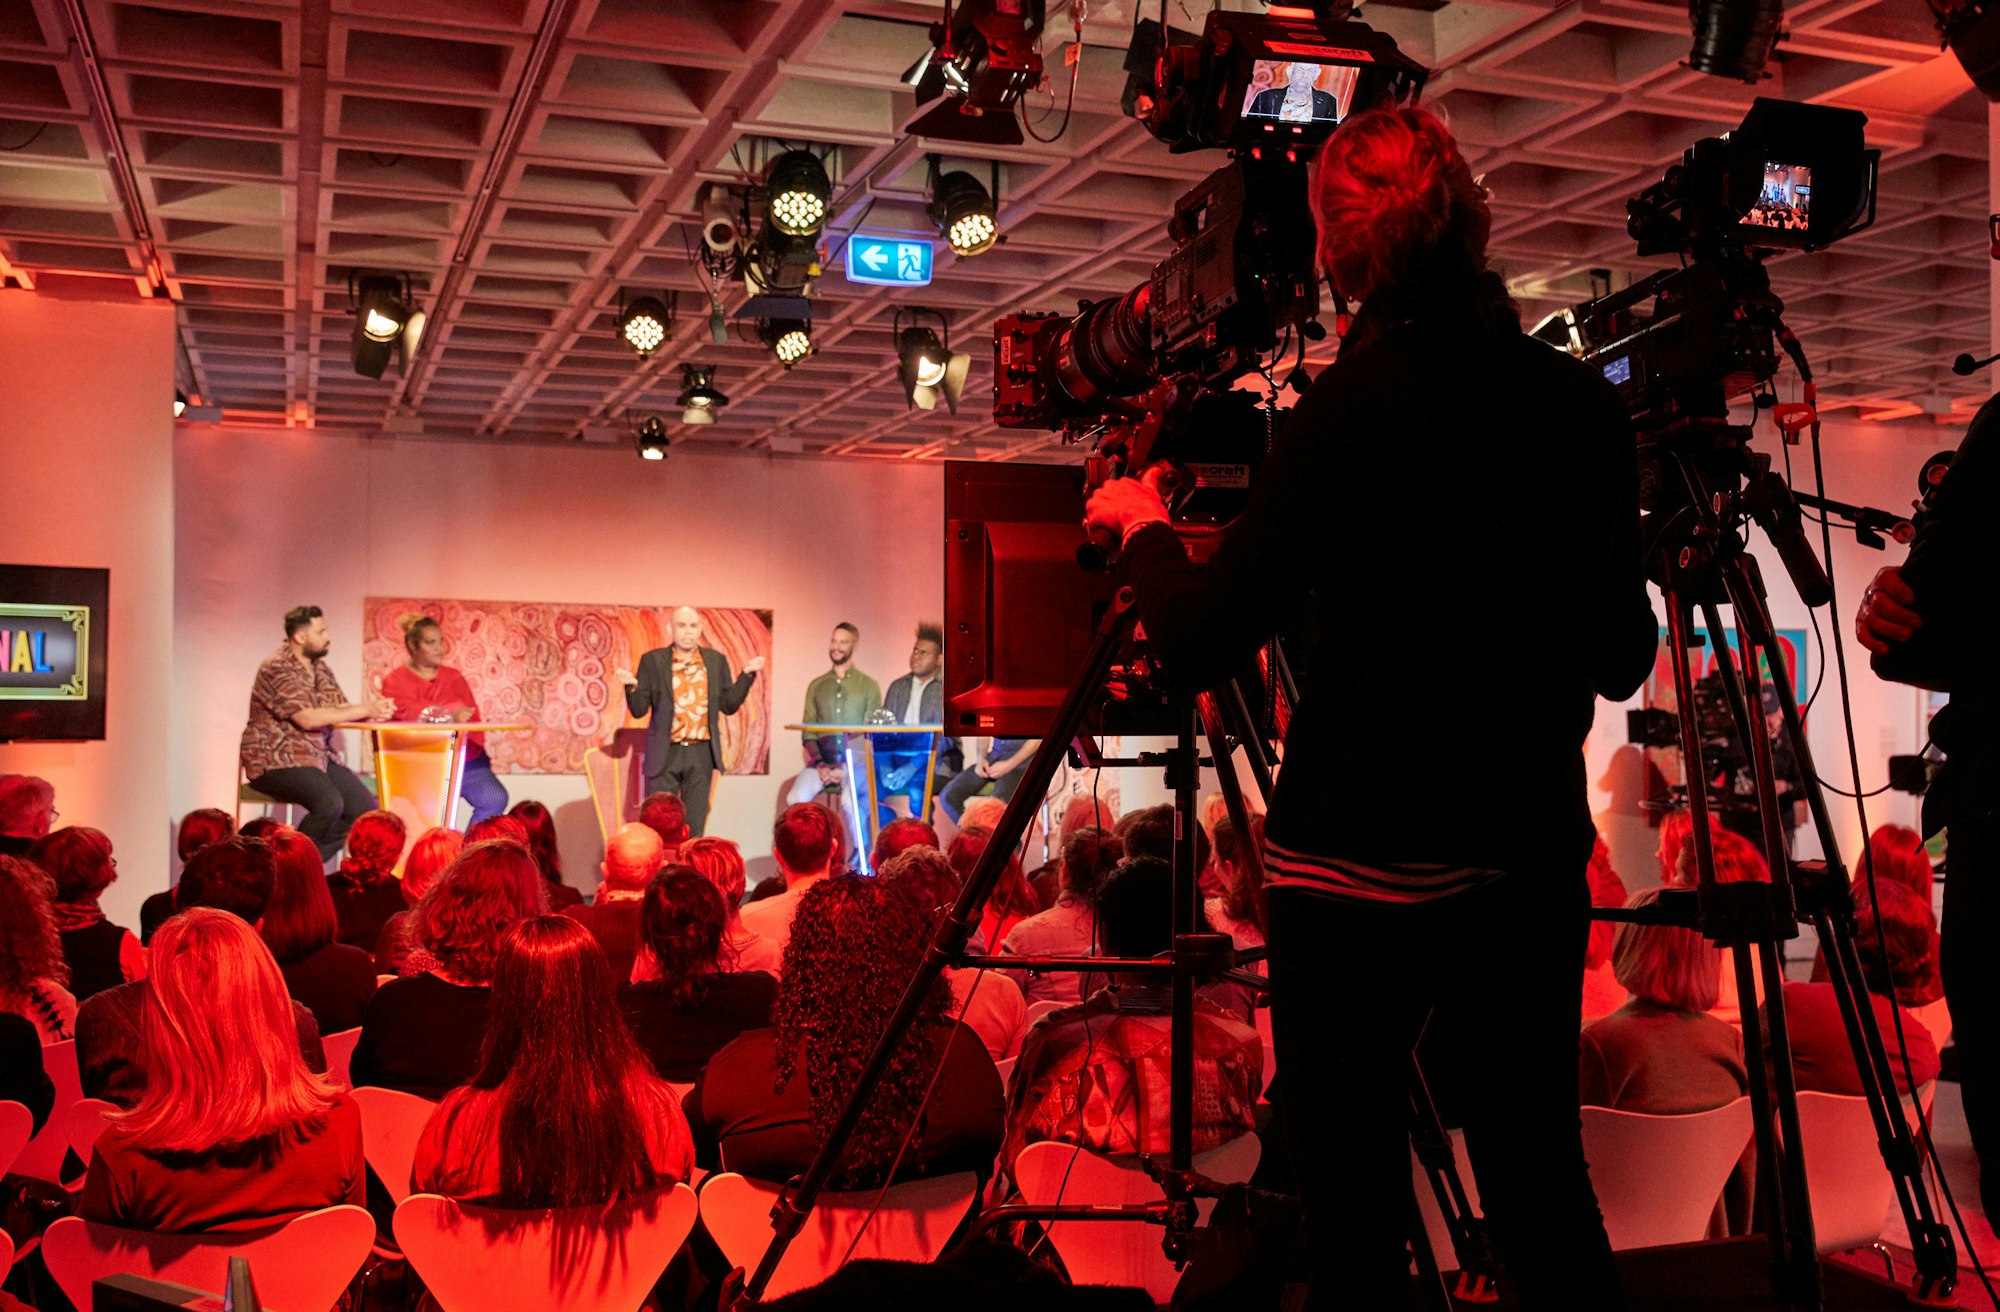 Five people on stage watched by a seated audience and filmed by a TV cameraperson.